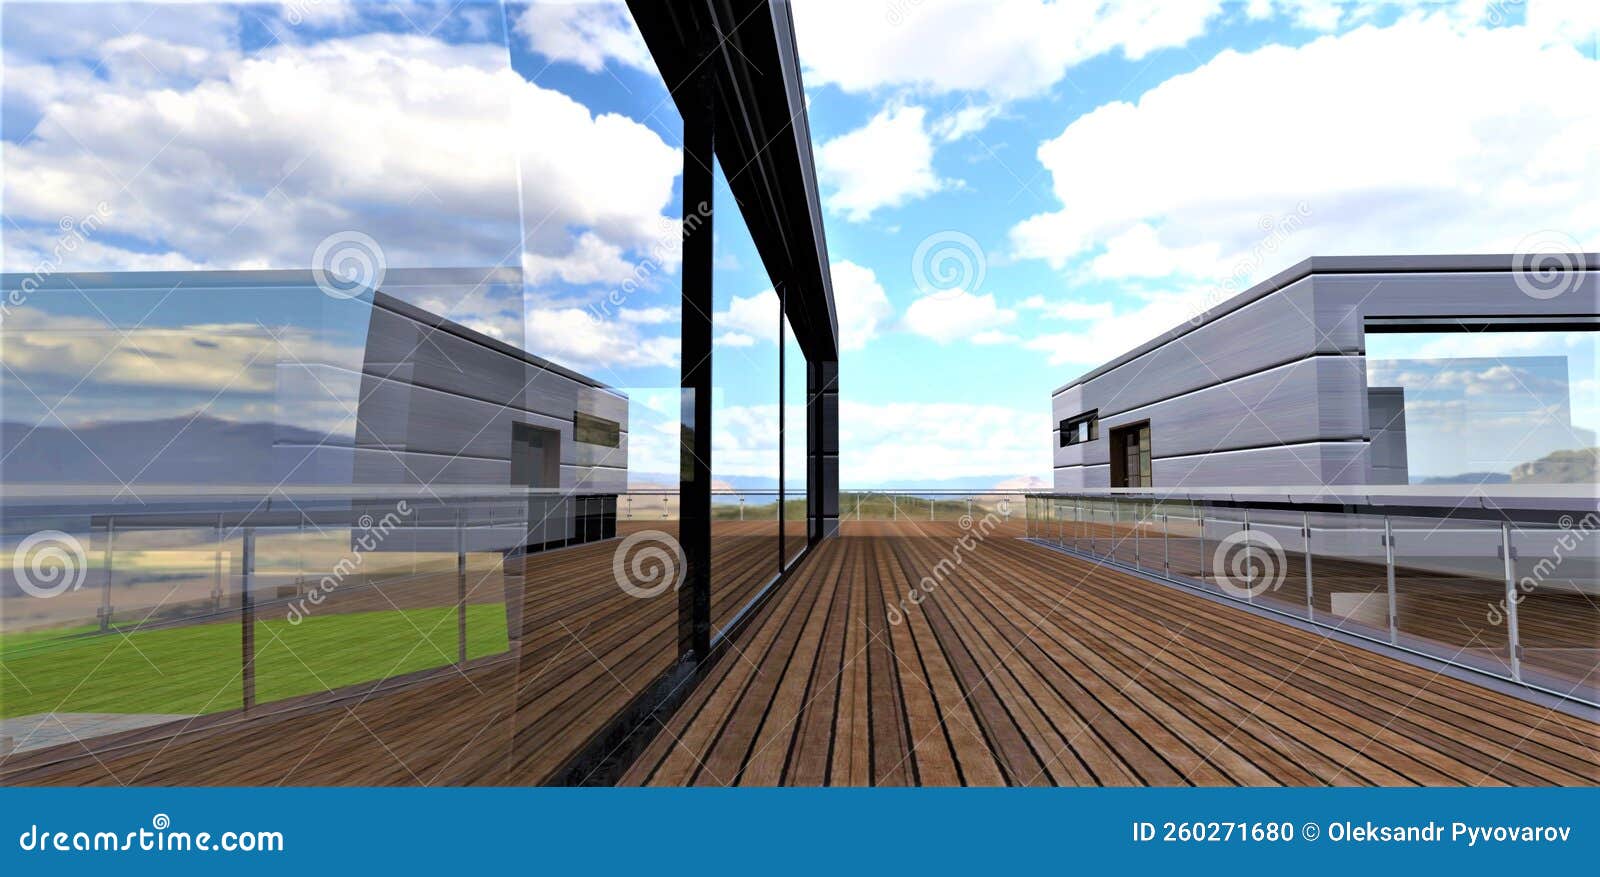 big mirror glass panoramic doors on the wooden openair terrace of the elite private estate built with ecologicaly clean energy